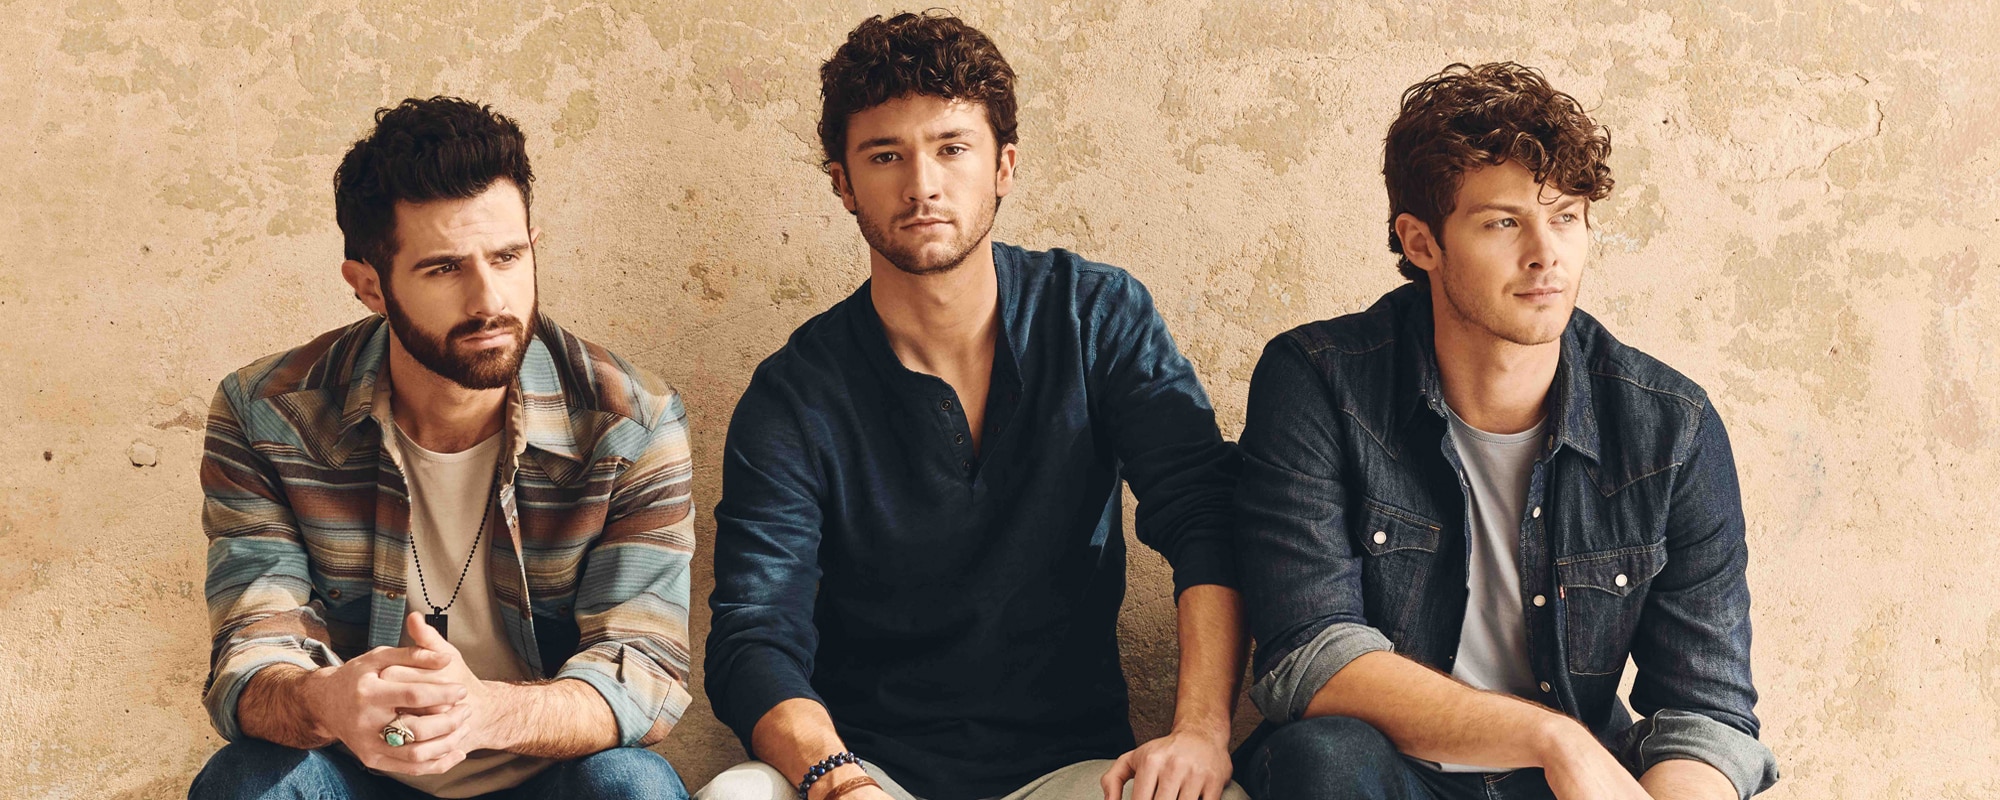 Restless Road Takes Dad’s Advice in New Single, “Took One Look at Her Momma”